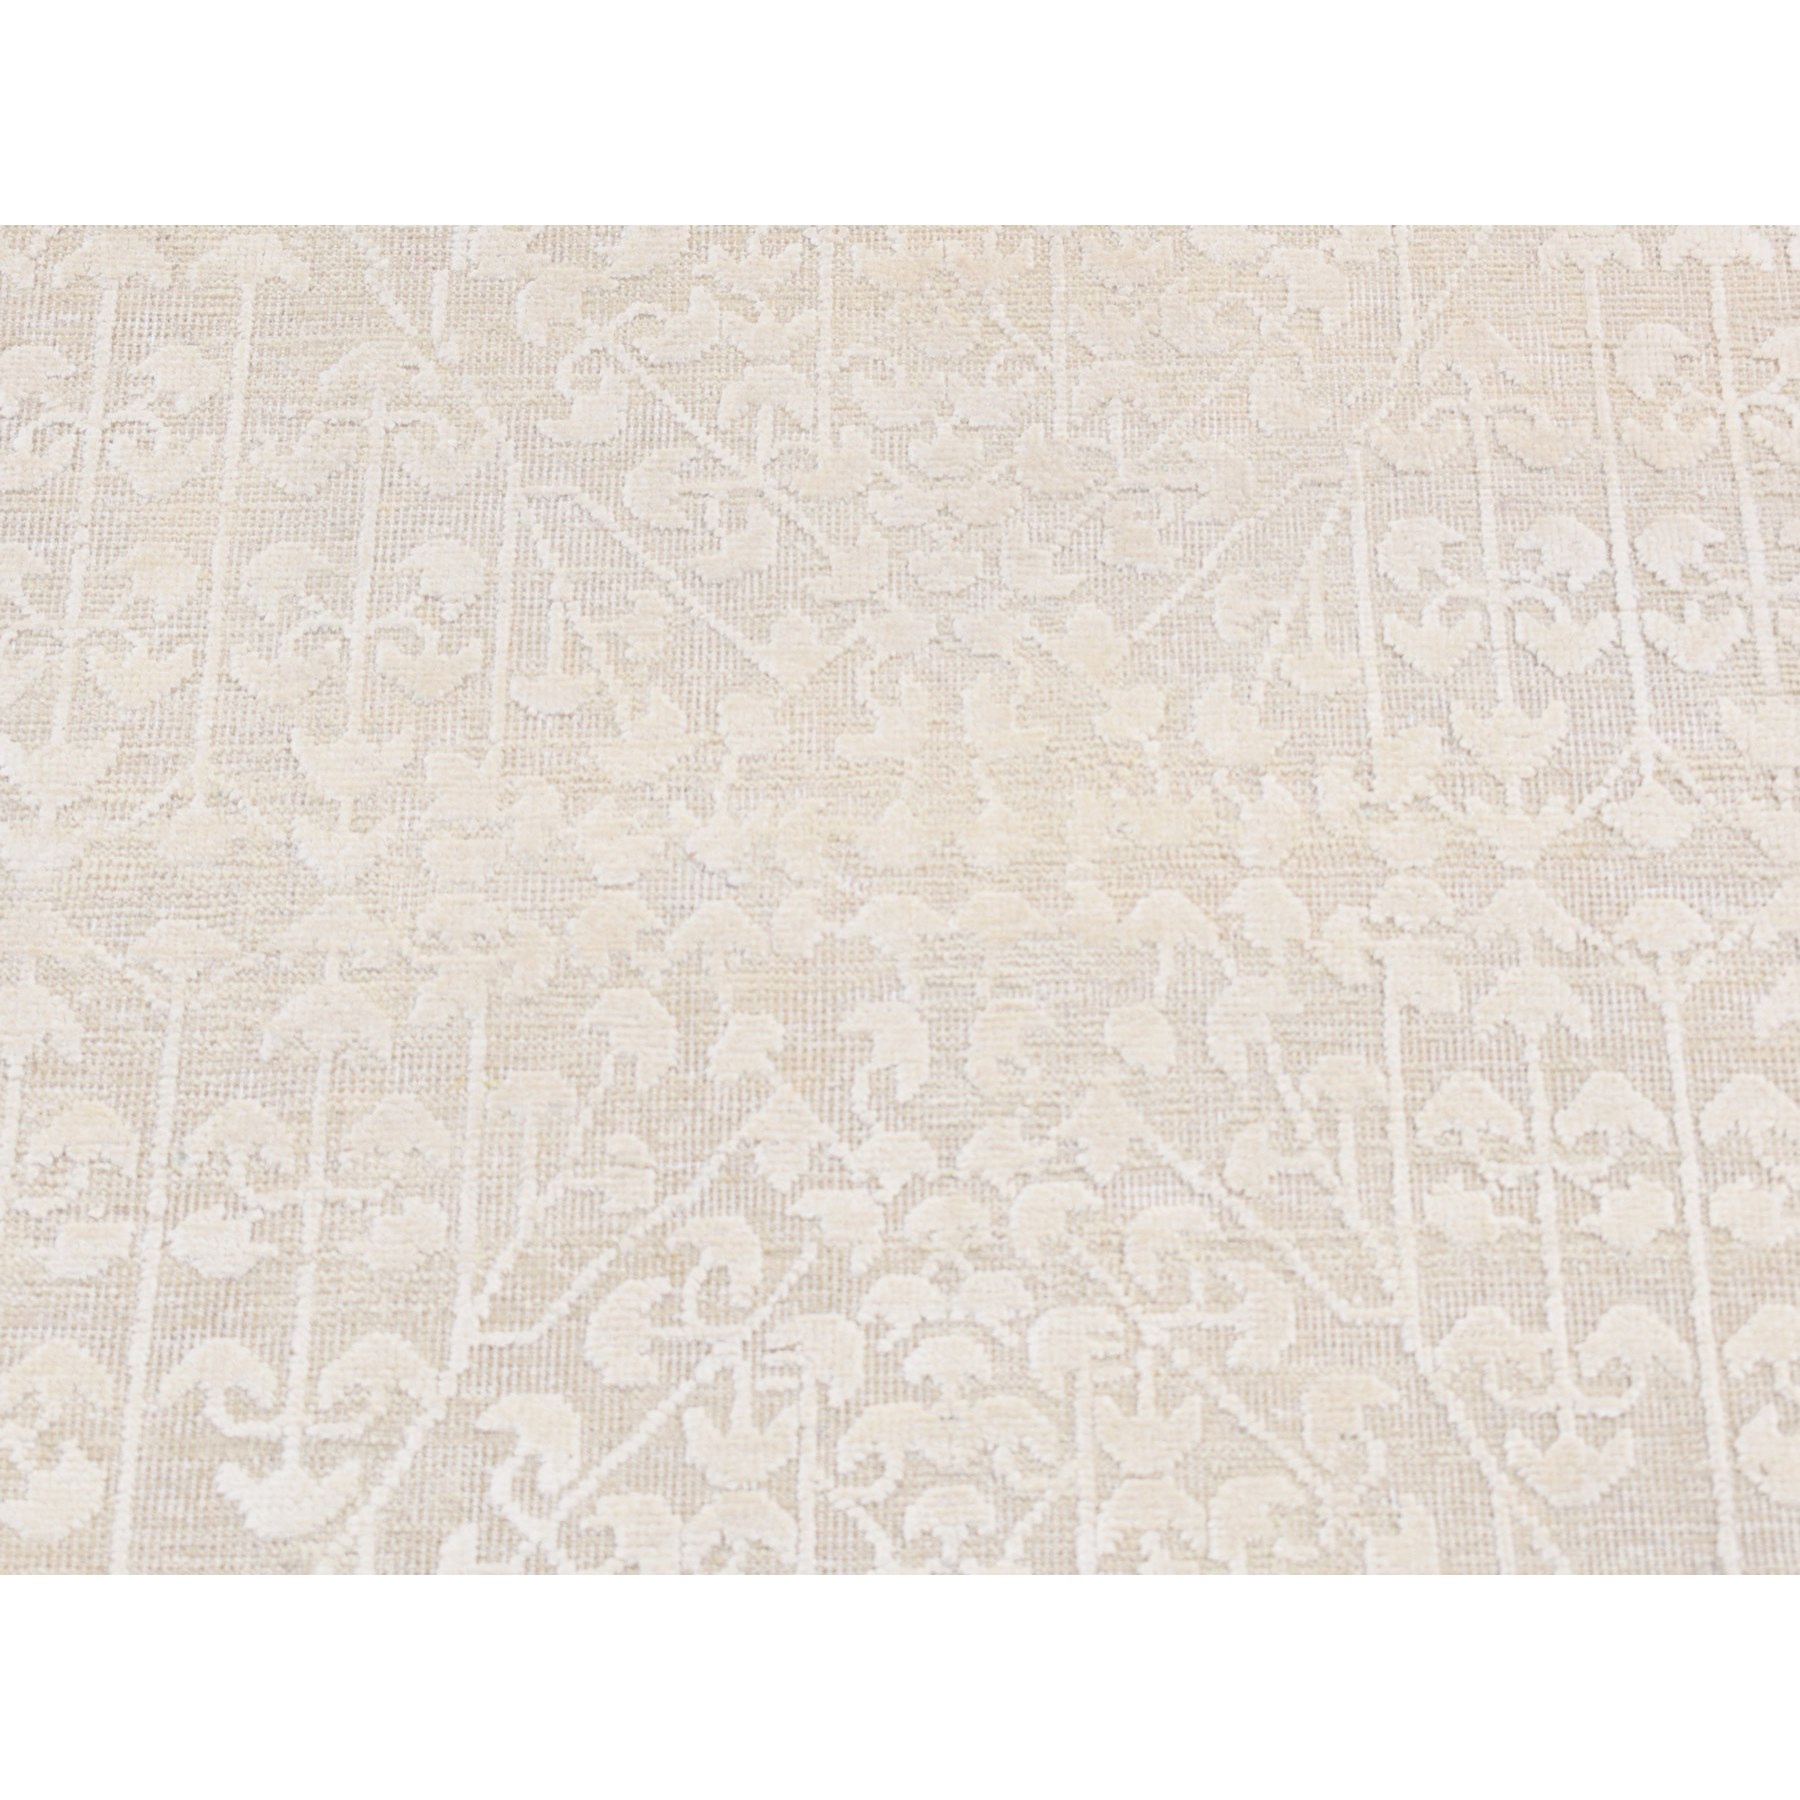 2'6"x11'8" Ivory, Hand Woven, Tone on Tone, Pure Silk with Textured Wool, Runner Oriental Rug 